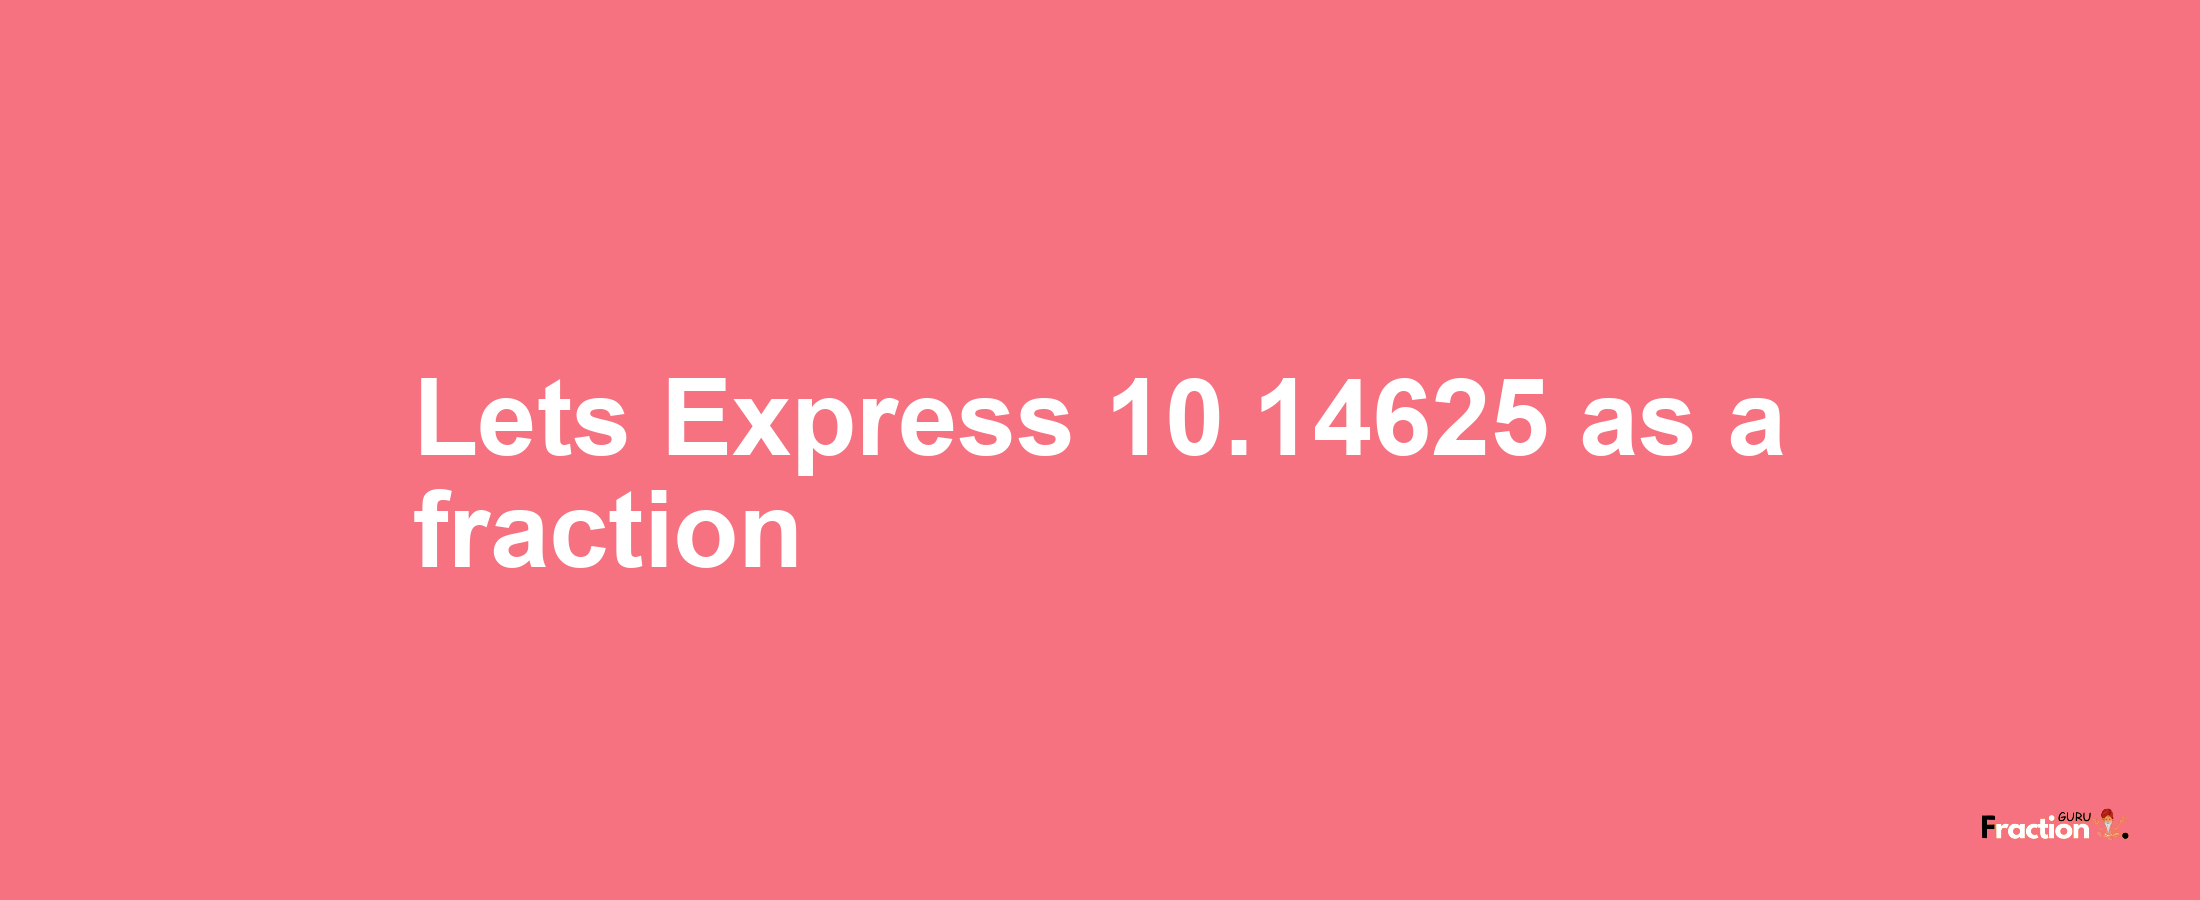 Lets Express 10.14625 as afraction